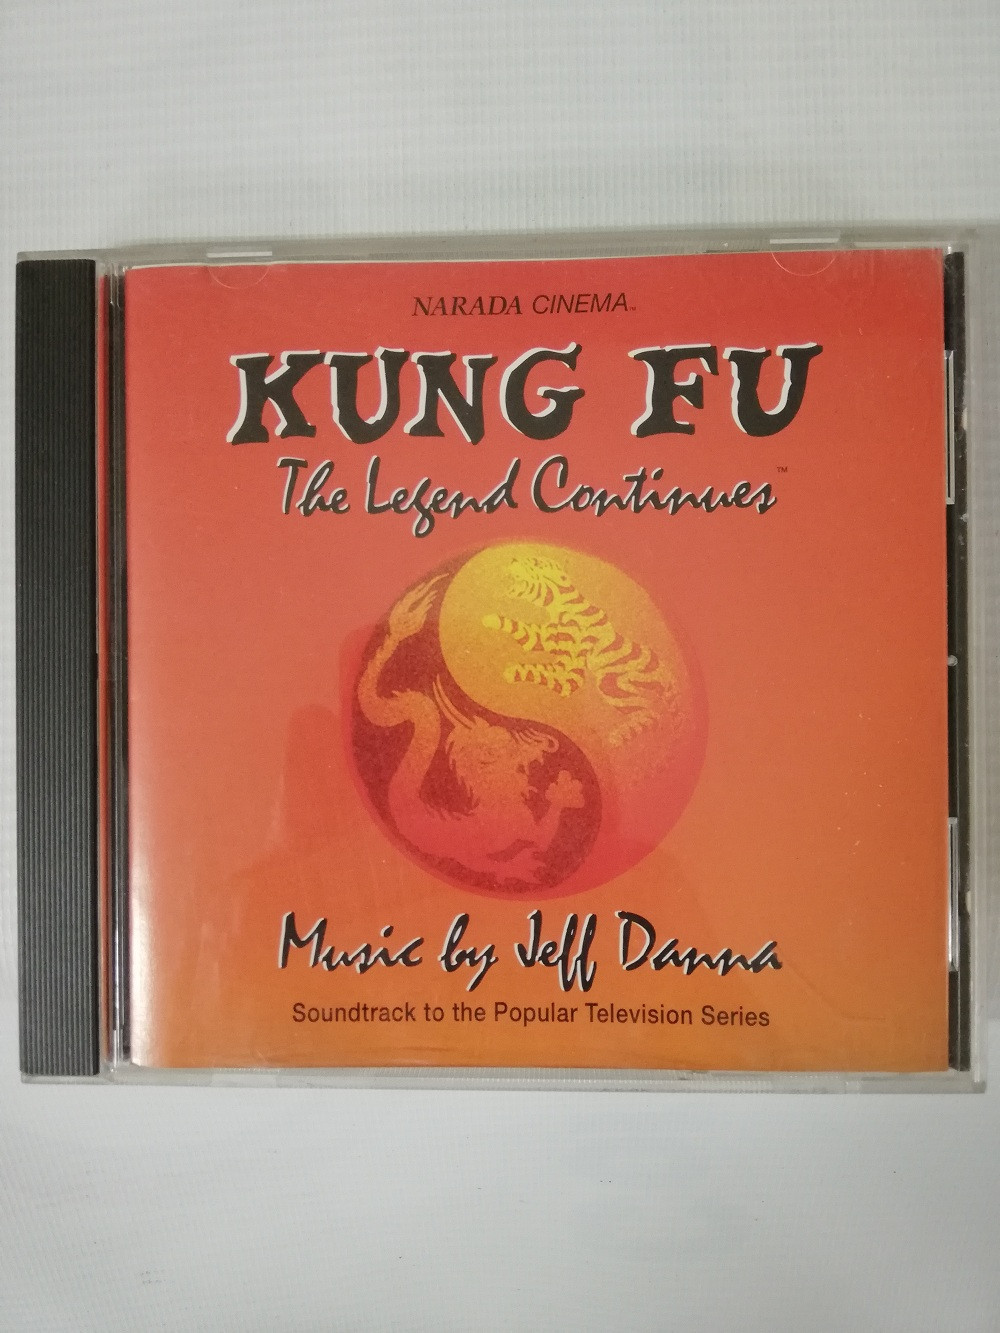 Imagen CD KUNG FU THE LEGEND CONTINUES - SOUNDTRACK TO THE POPULAR TELEVISION SERIES 1